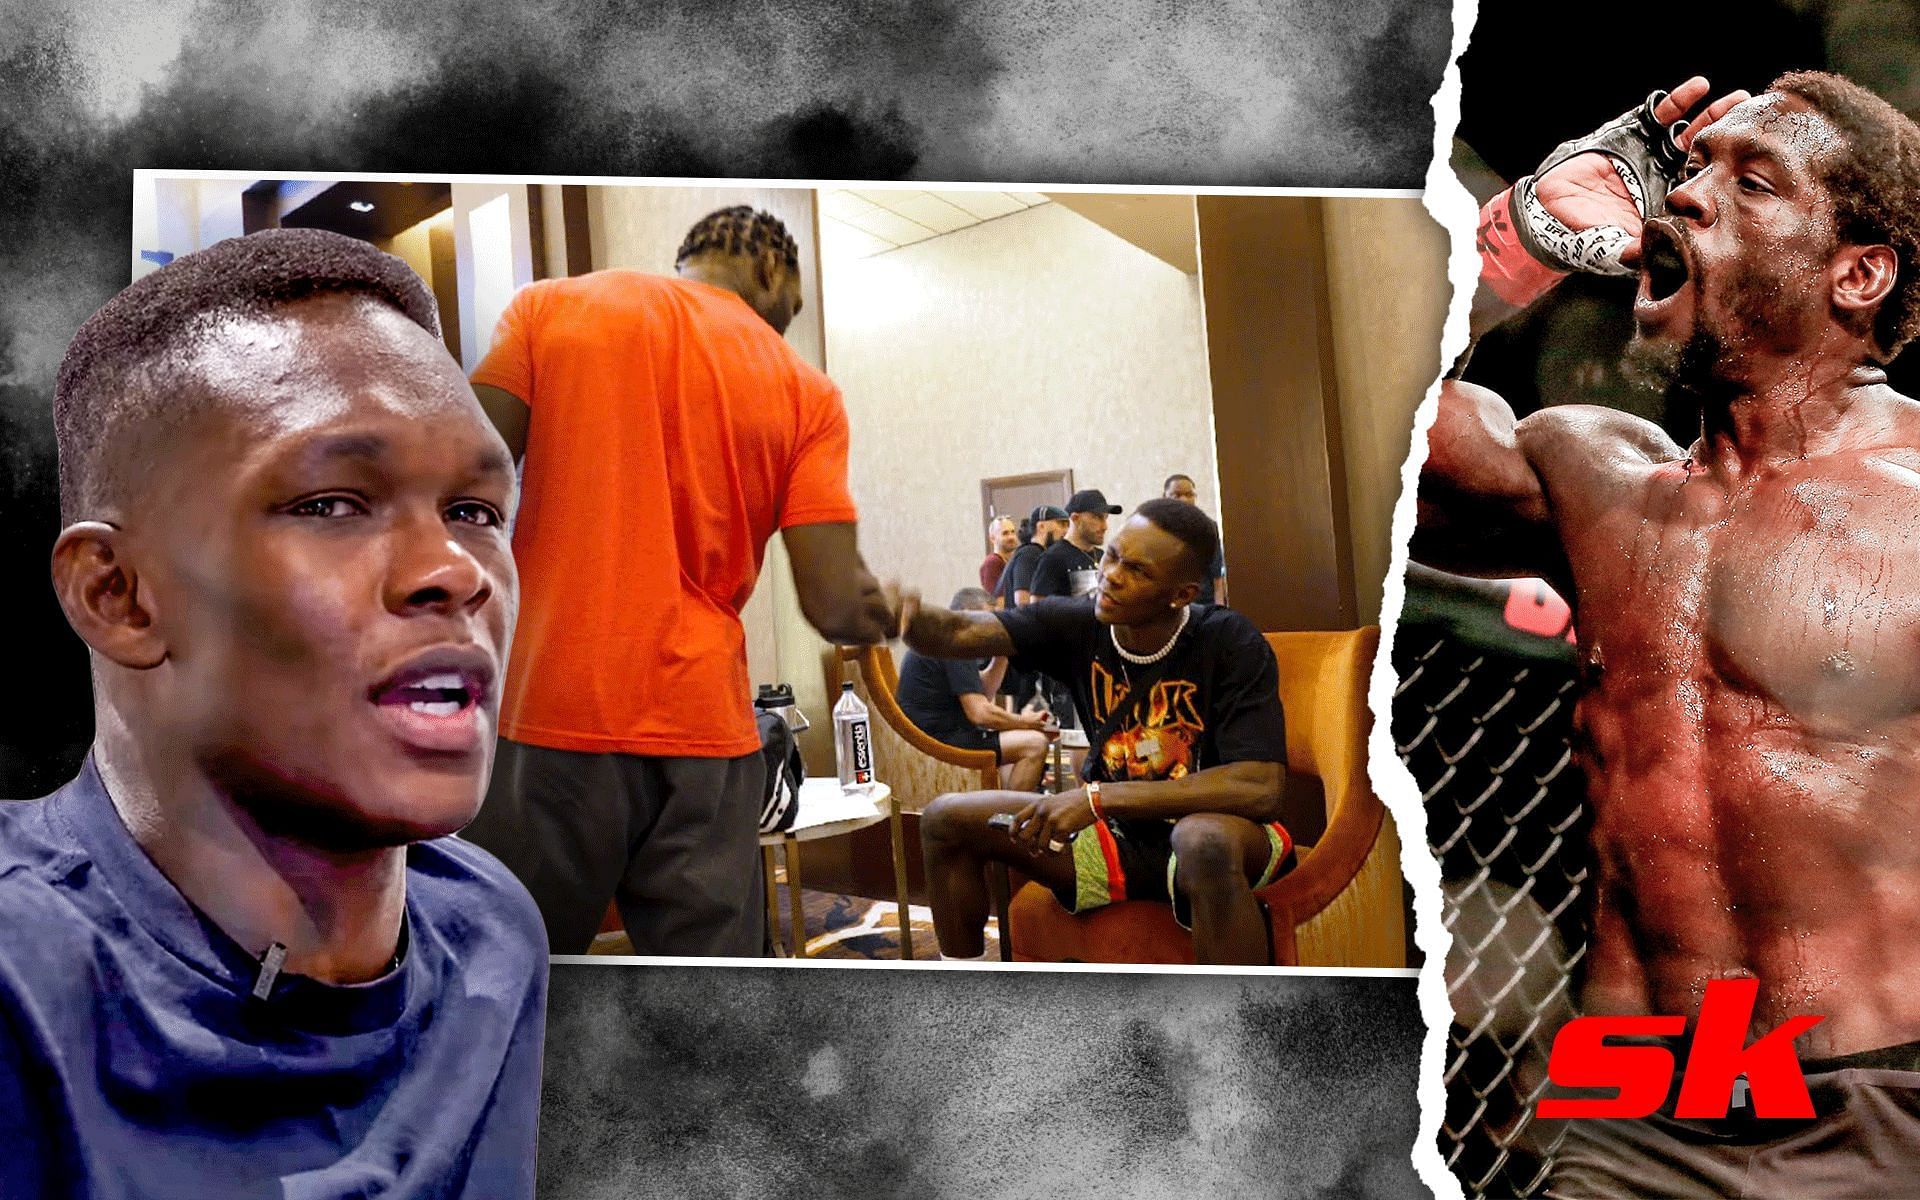 Israel Adesanya shares experience of first meeting with Jared Cannonier [Adesanya image via Freestylebender on YouTube | center image via UFC Embedded on YouTube | Cannonier image via Getty]